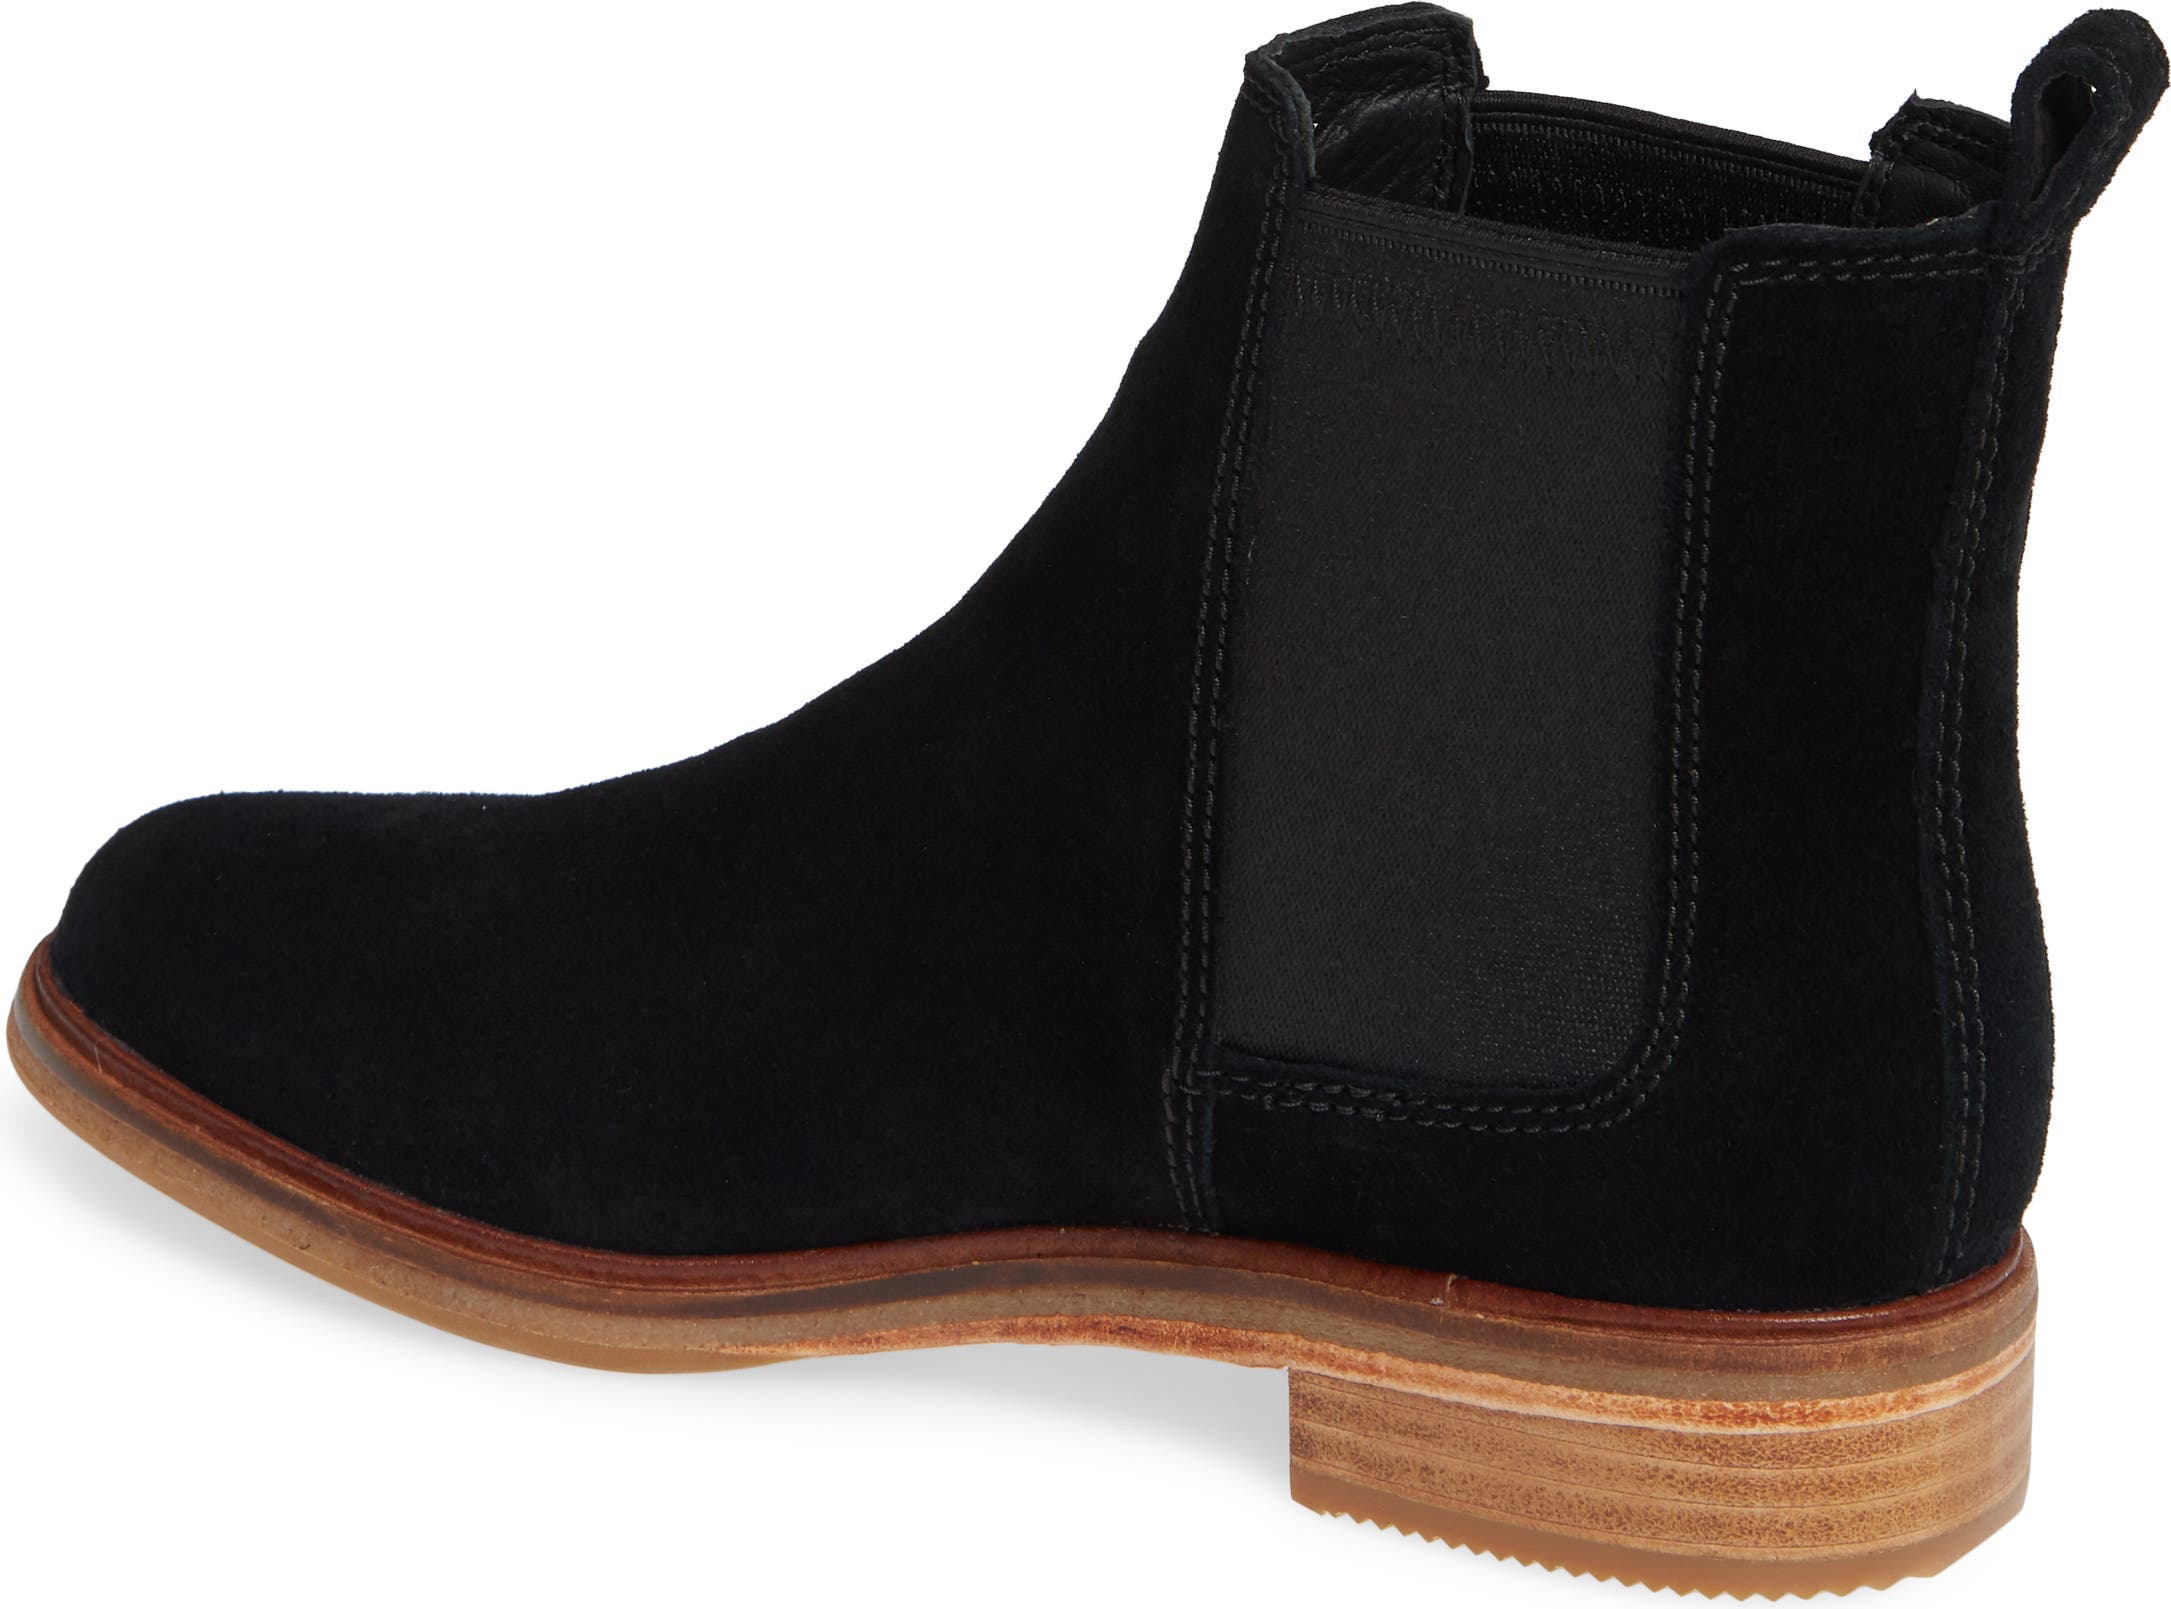 CLARKS Clarkdale Arlo Womens Boots 